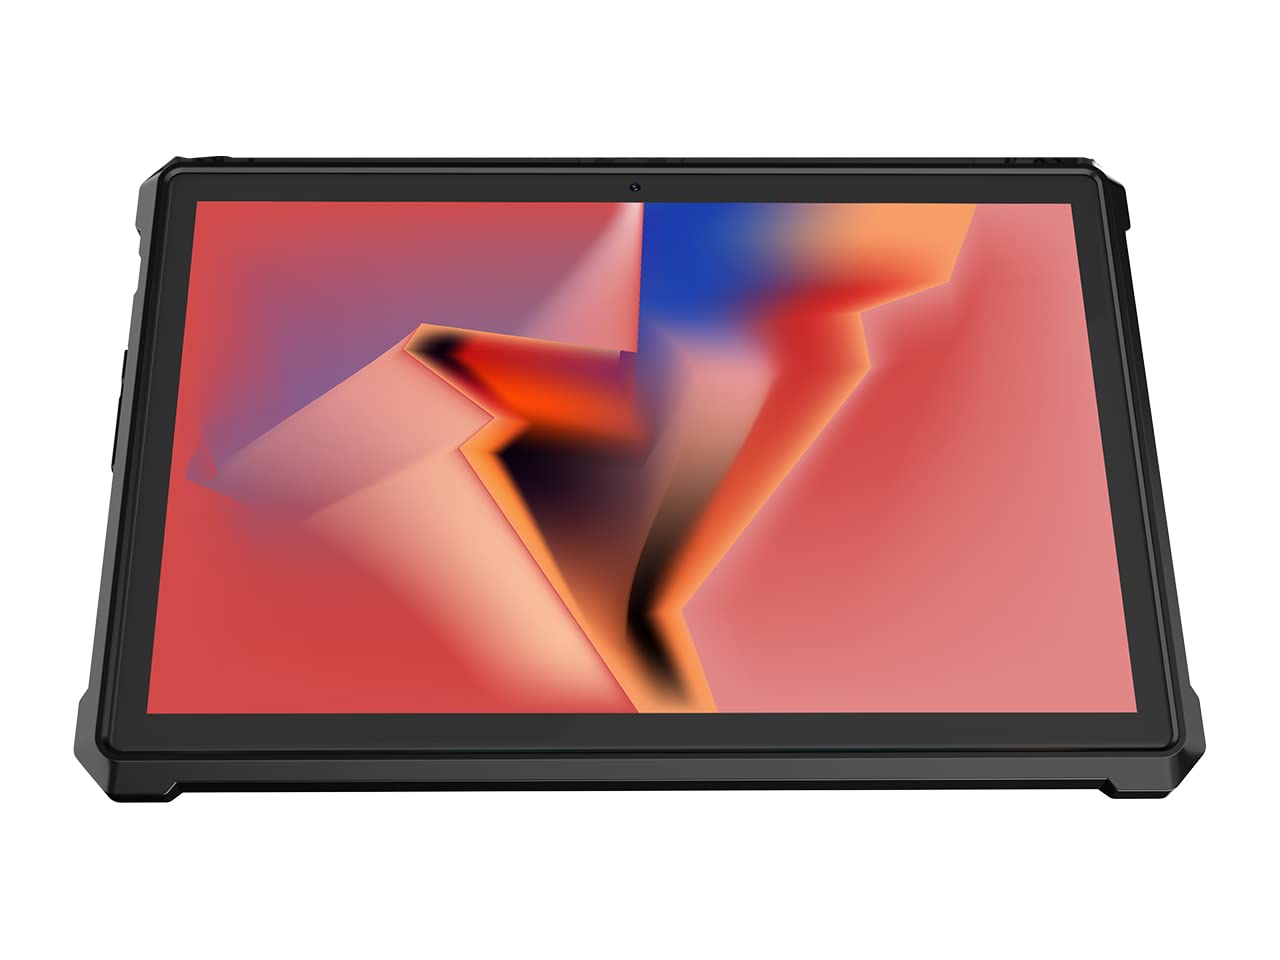 Maxwest Astro 10R Android LTE Tablet, 10.1 Curved HD Screen, 32GB Storage, Long-Lasting Battery, Expandable Memory